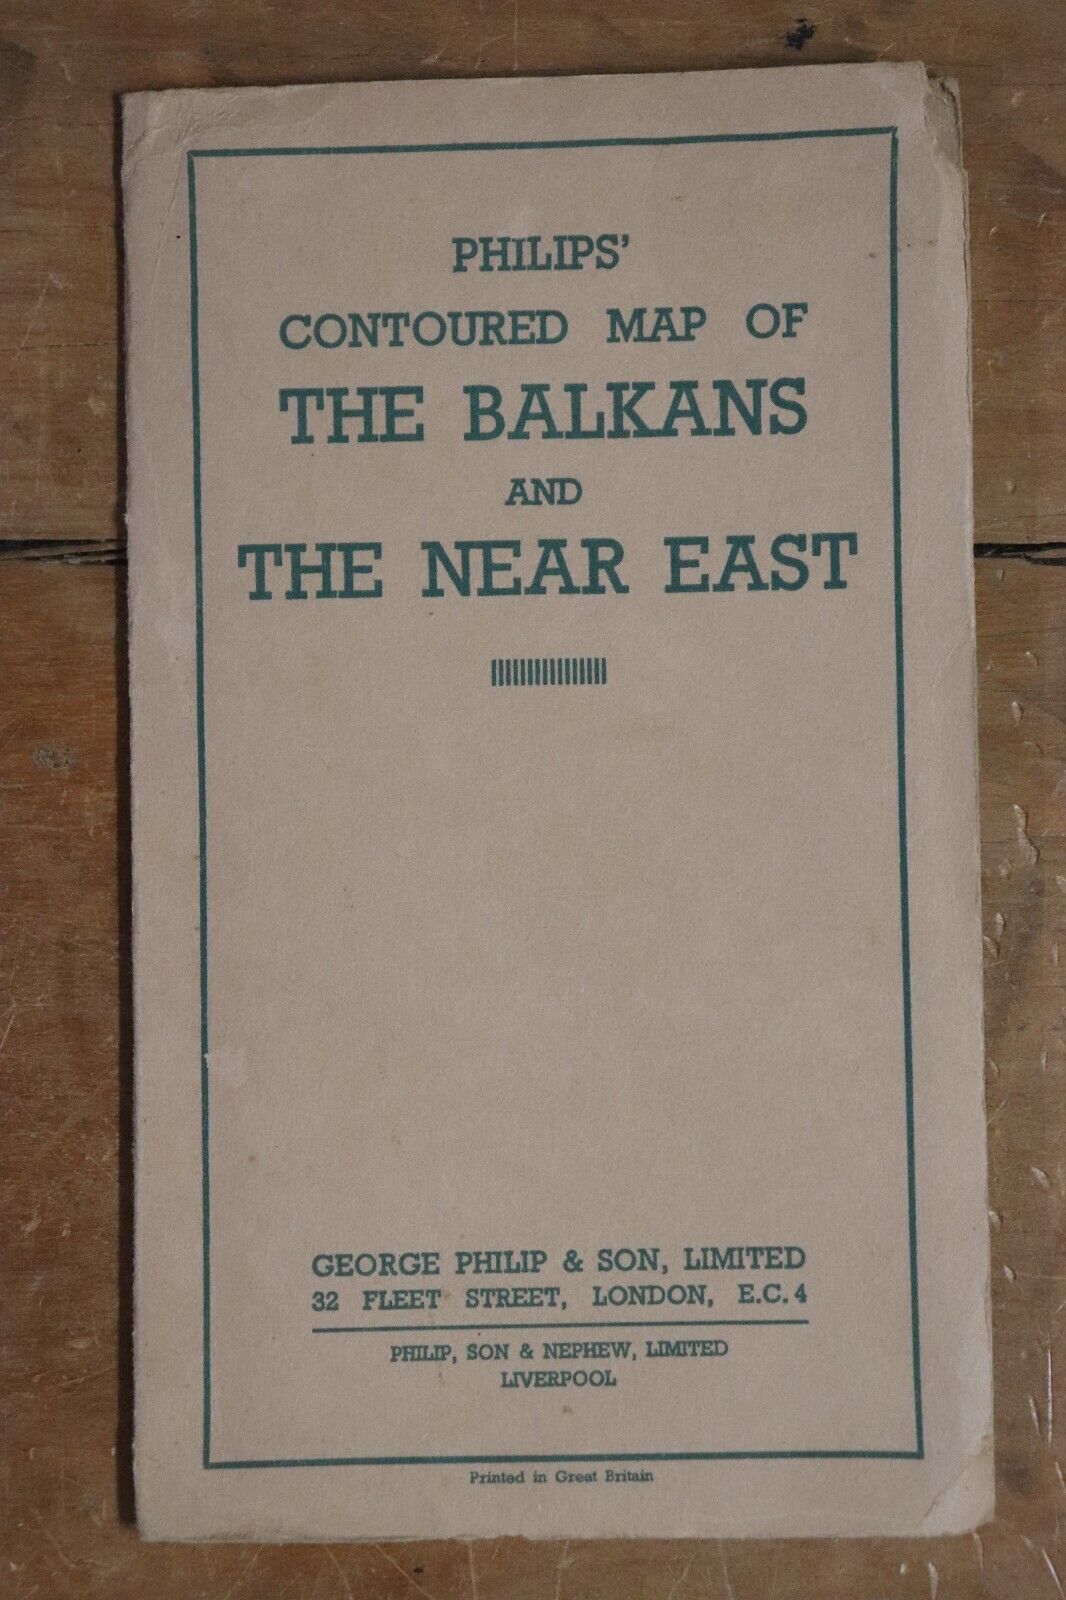 The London Geographical Society Map of The Balkans - 1941 - Antique Map